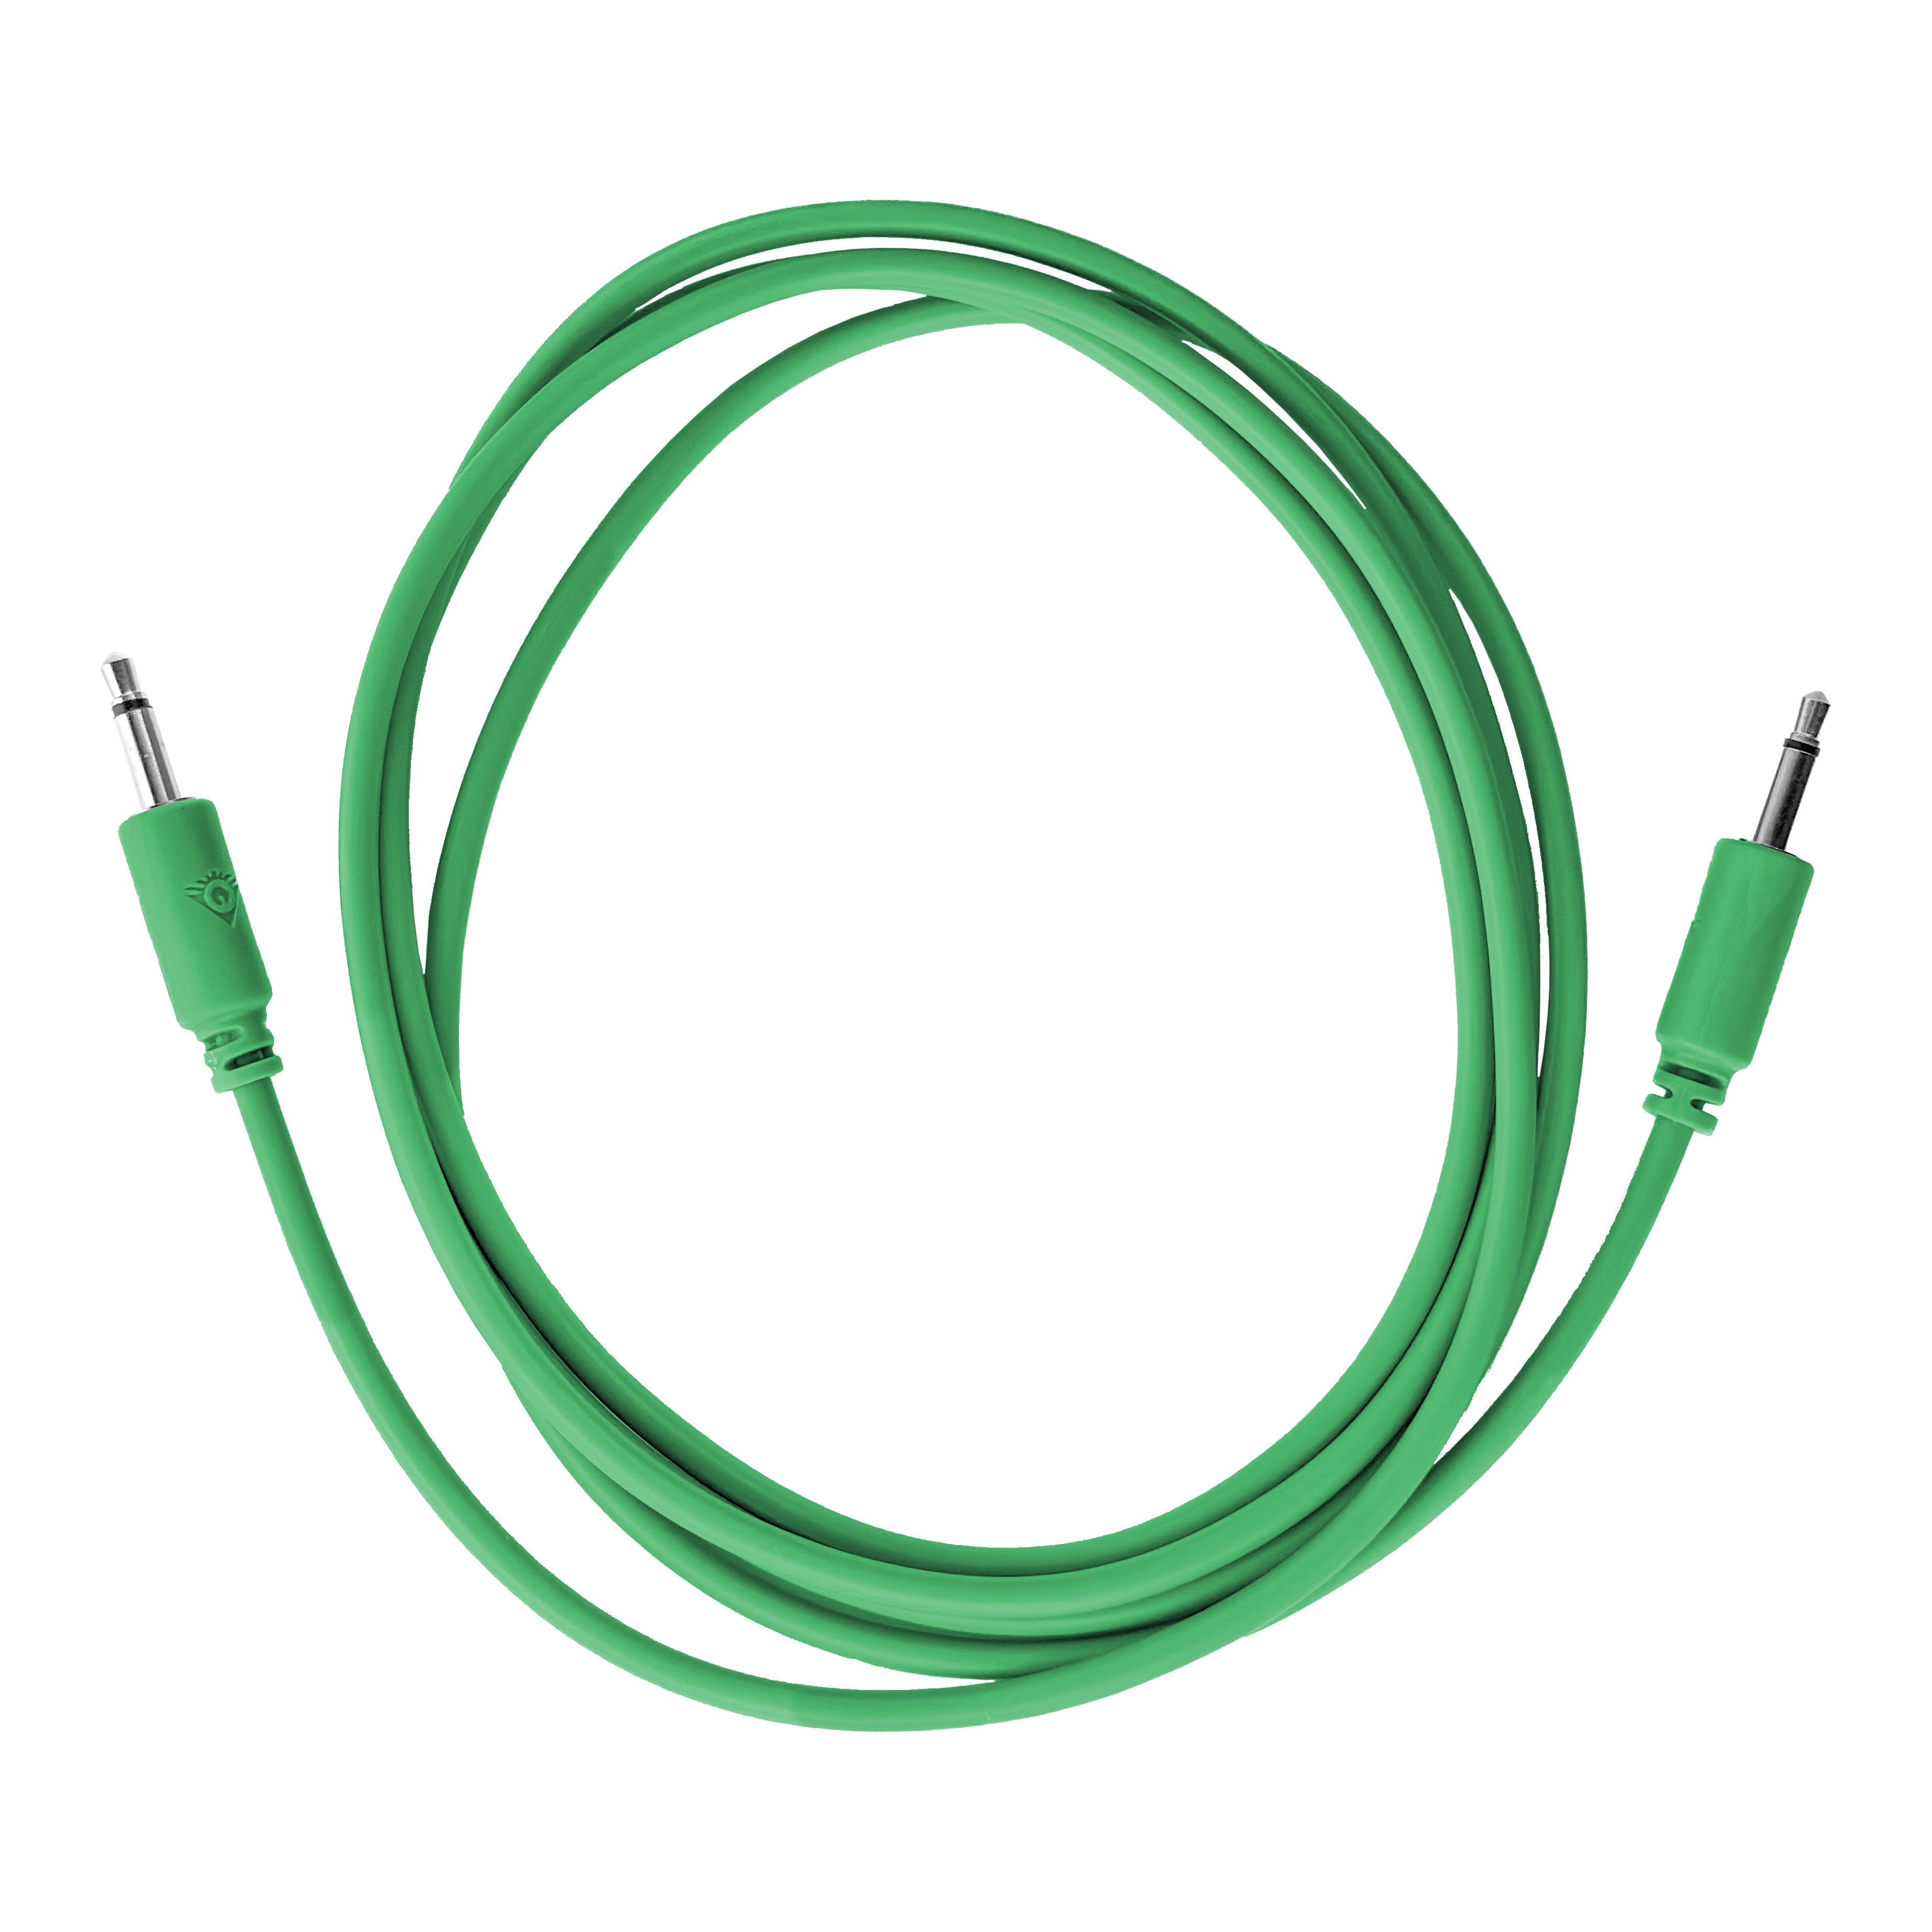 Black Market Modular 3.5mm Patch Cable - 150cm/60" - Green View 1